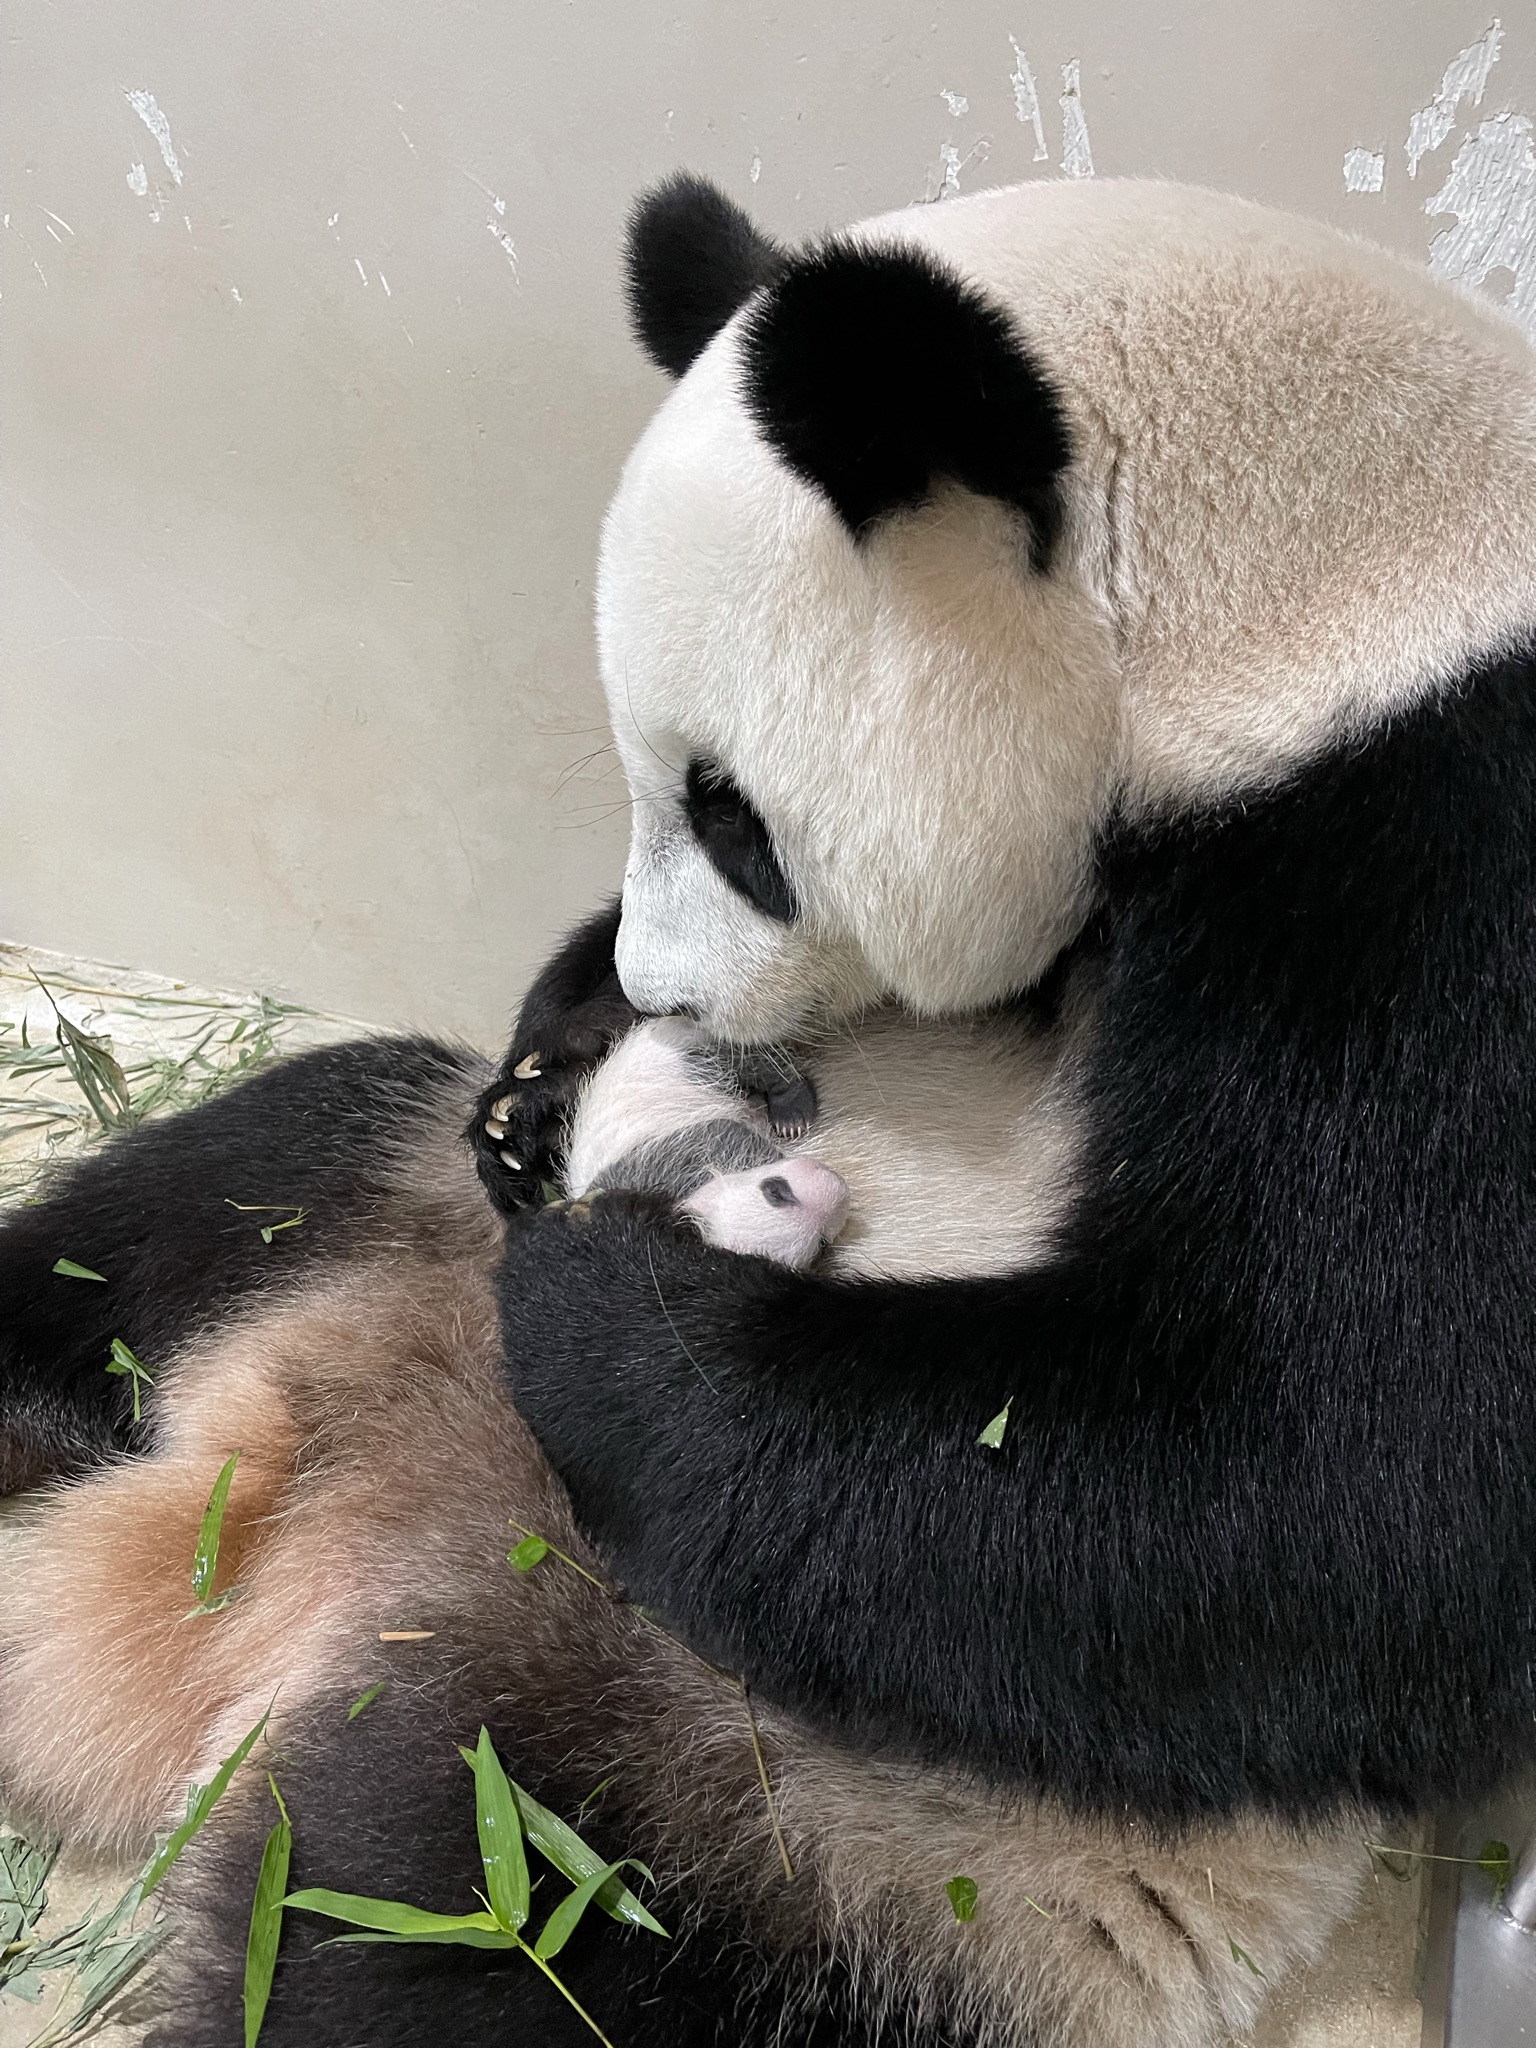 Jia Jia cradling 23-day-old Le Le.